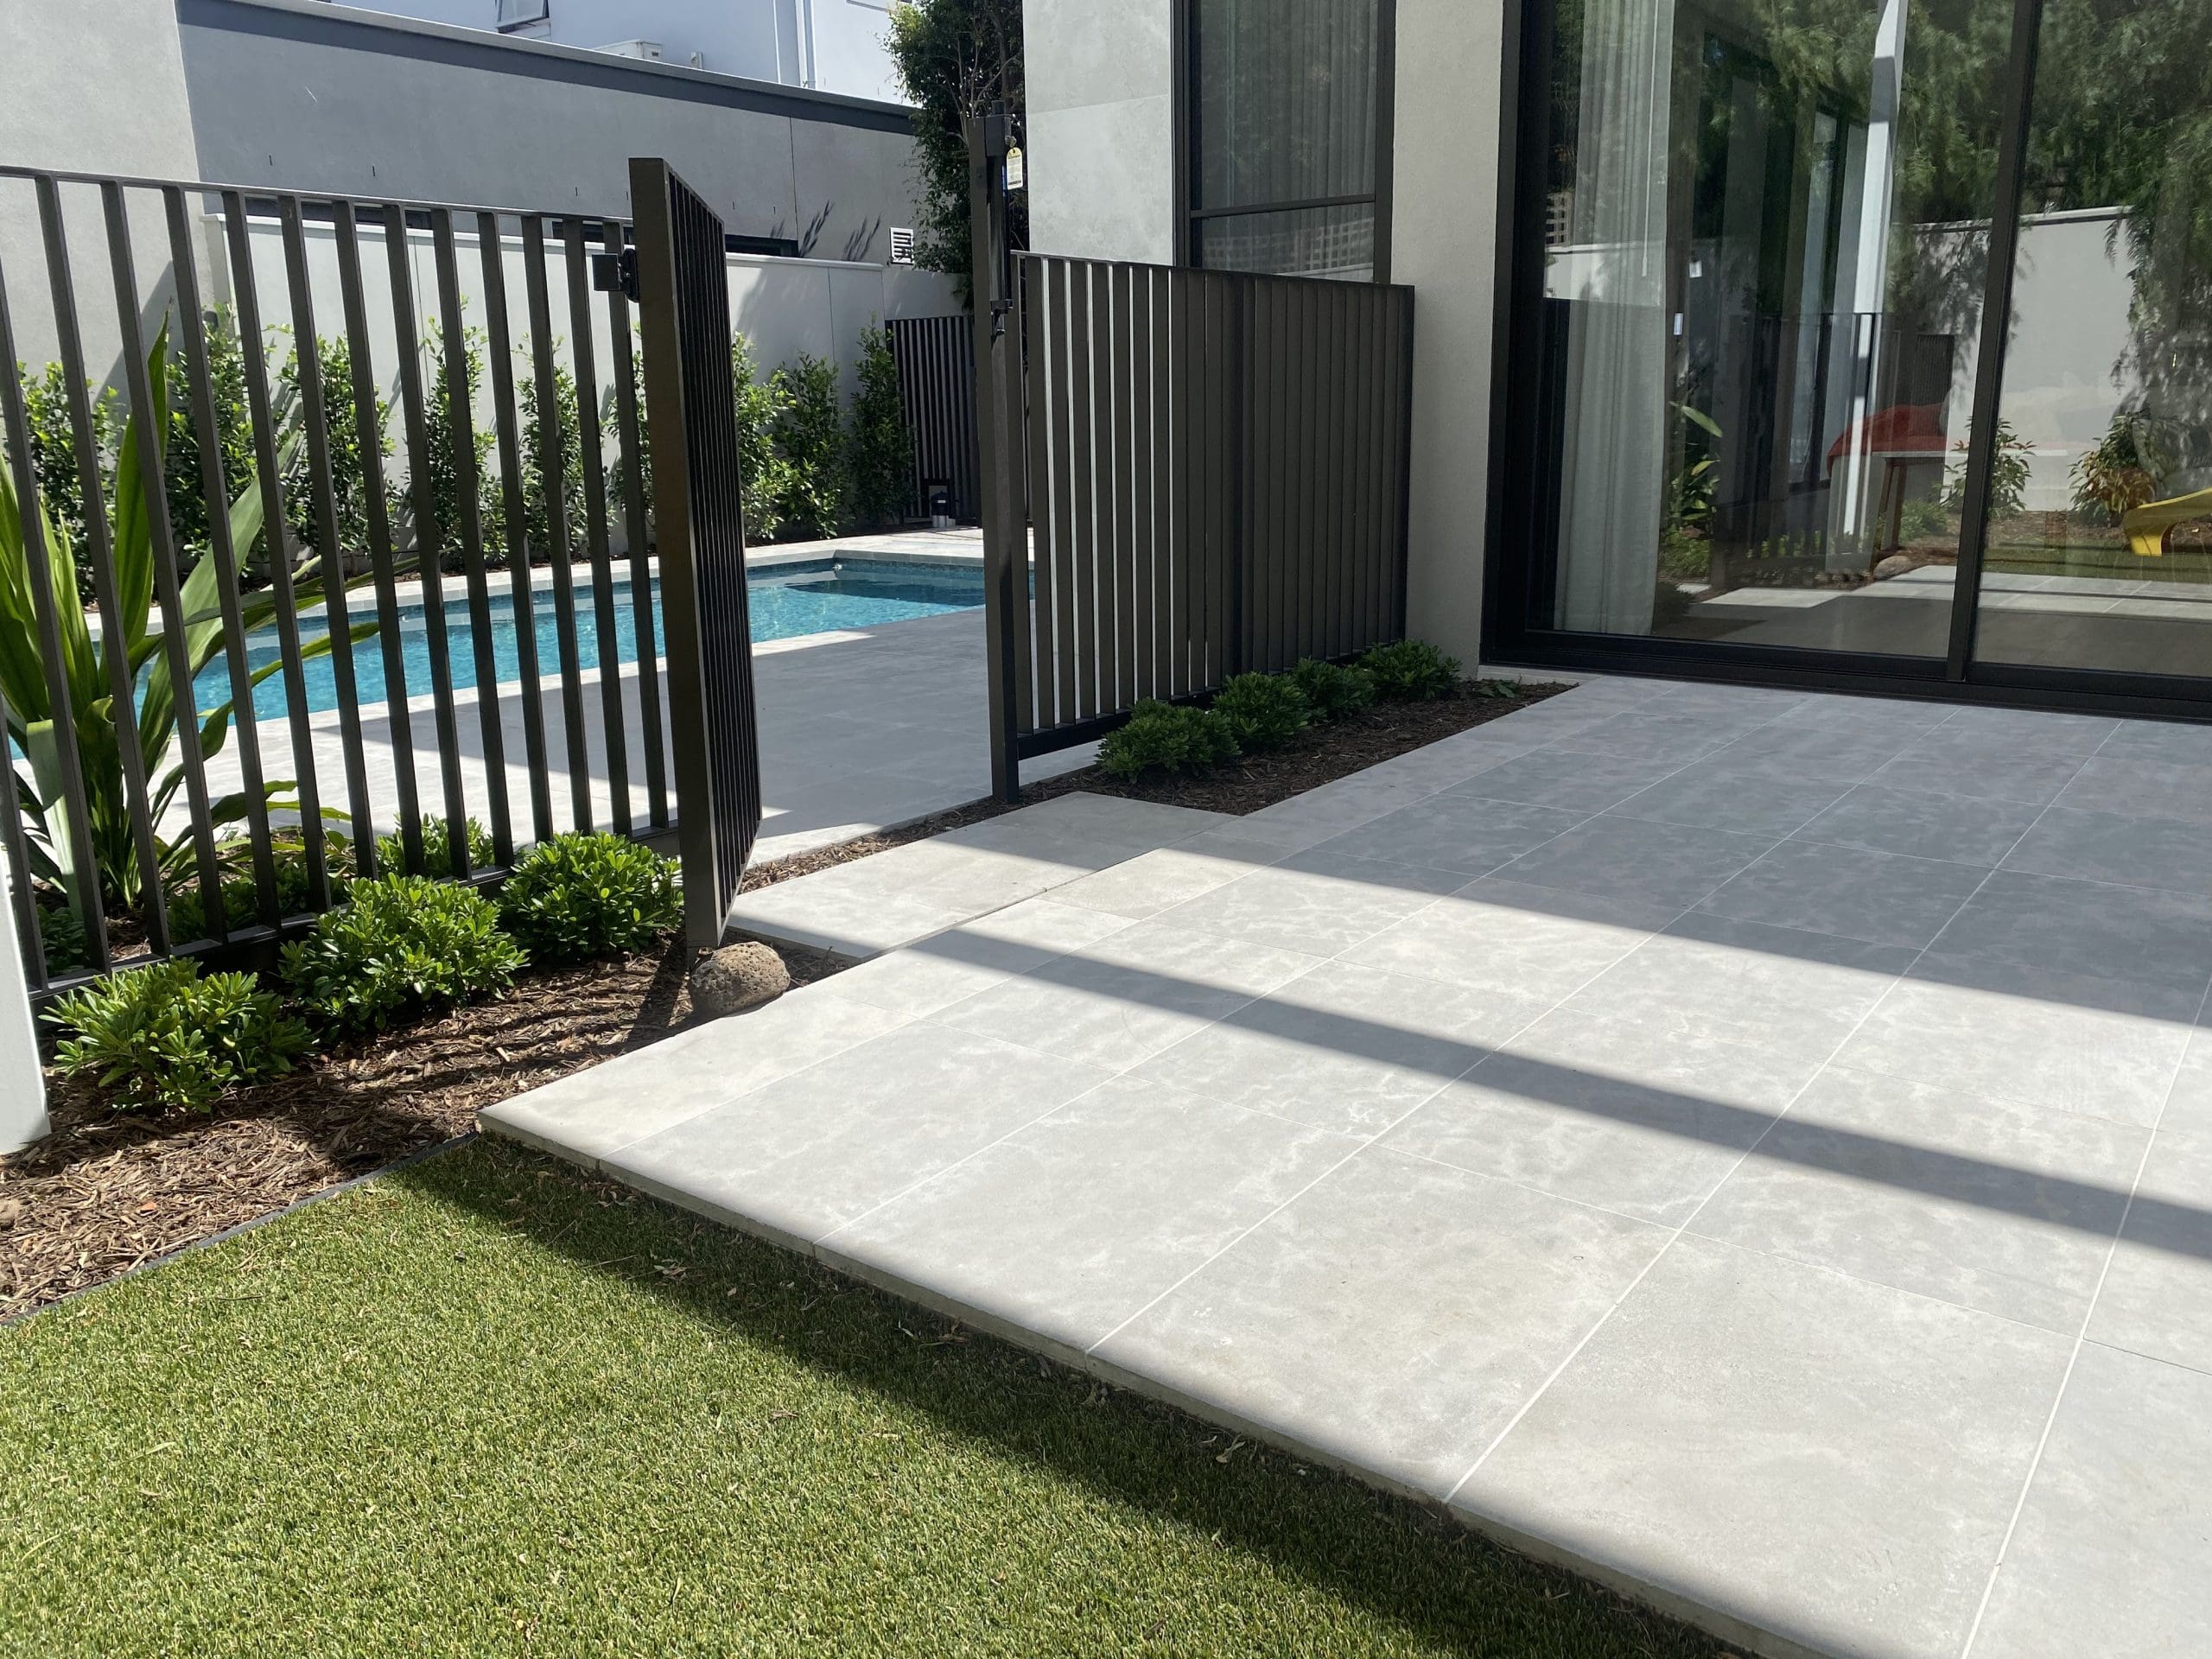 MADDISON BRUSHED & TUMBLED LIMESTONE_RMS TRADERS_NATURAL STONE GREY PAVERS POOL COPING TILES SUPPLIER MELBOURNE (292)0